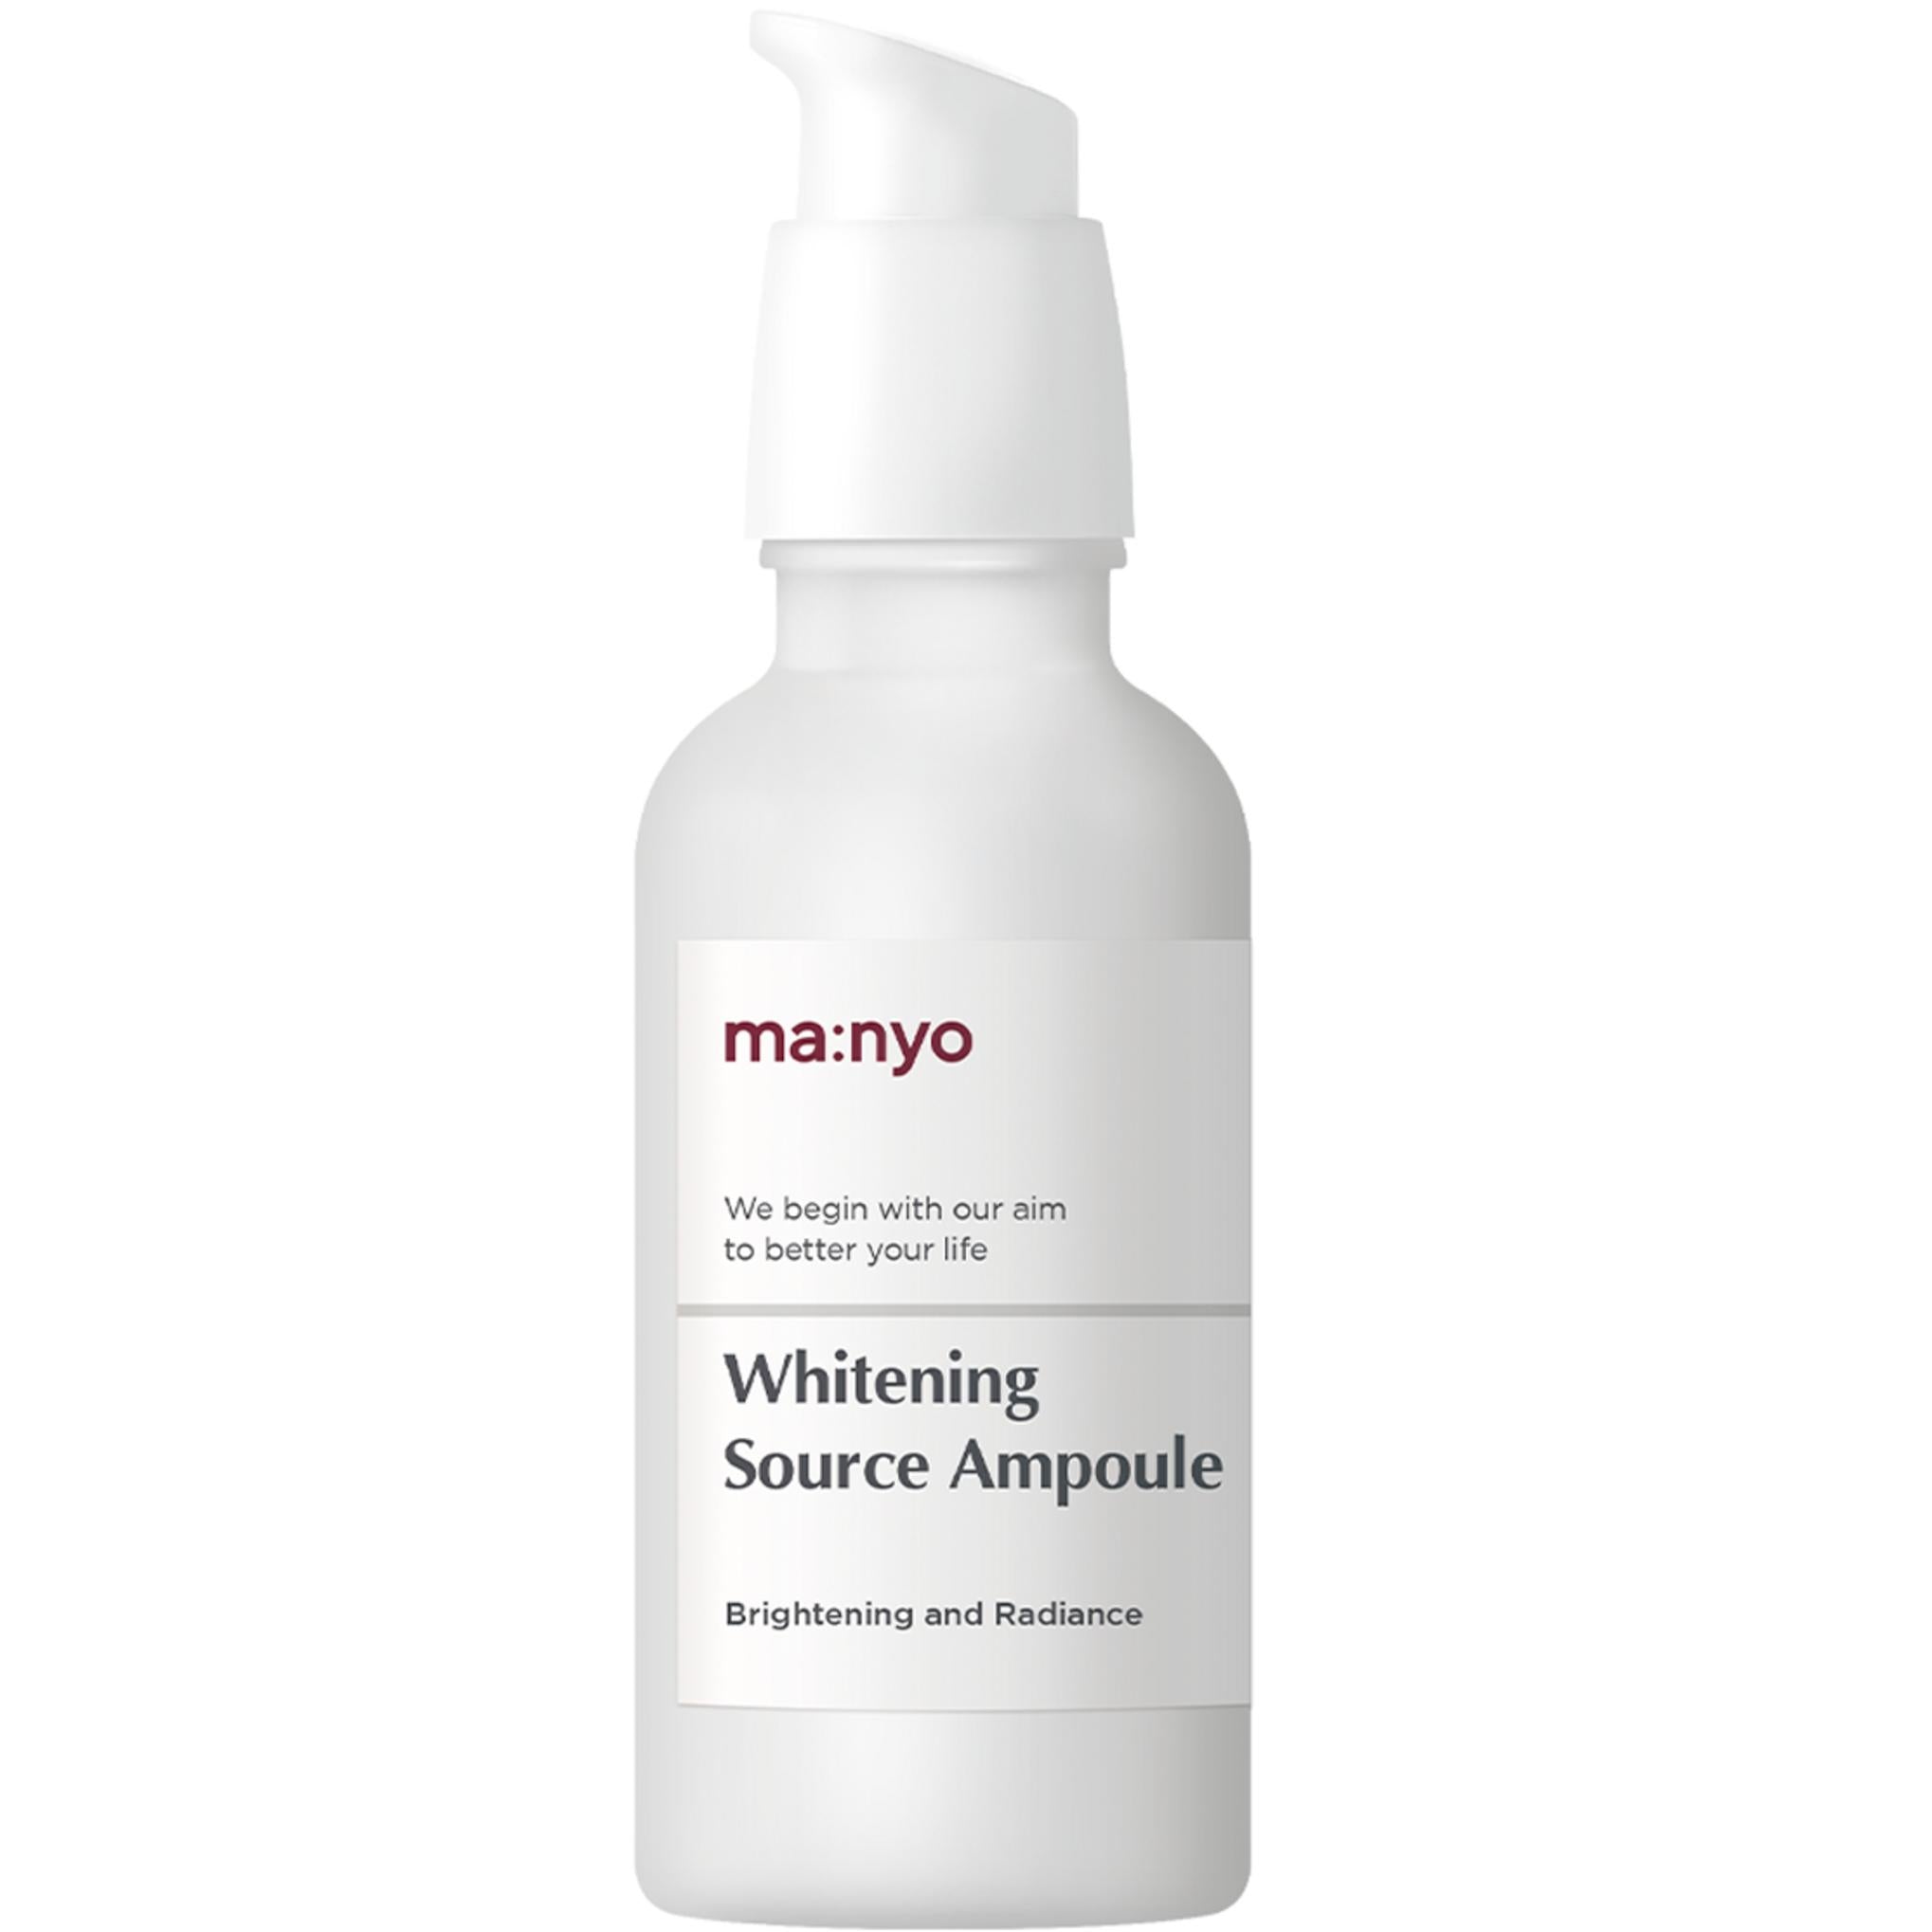 Manyo Factory Whitening Source Ampoule